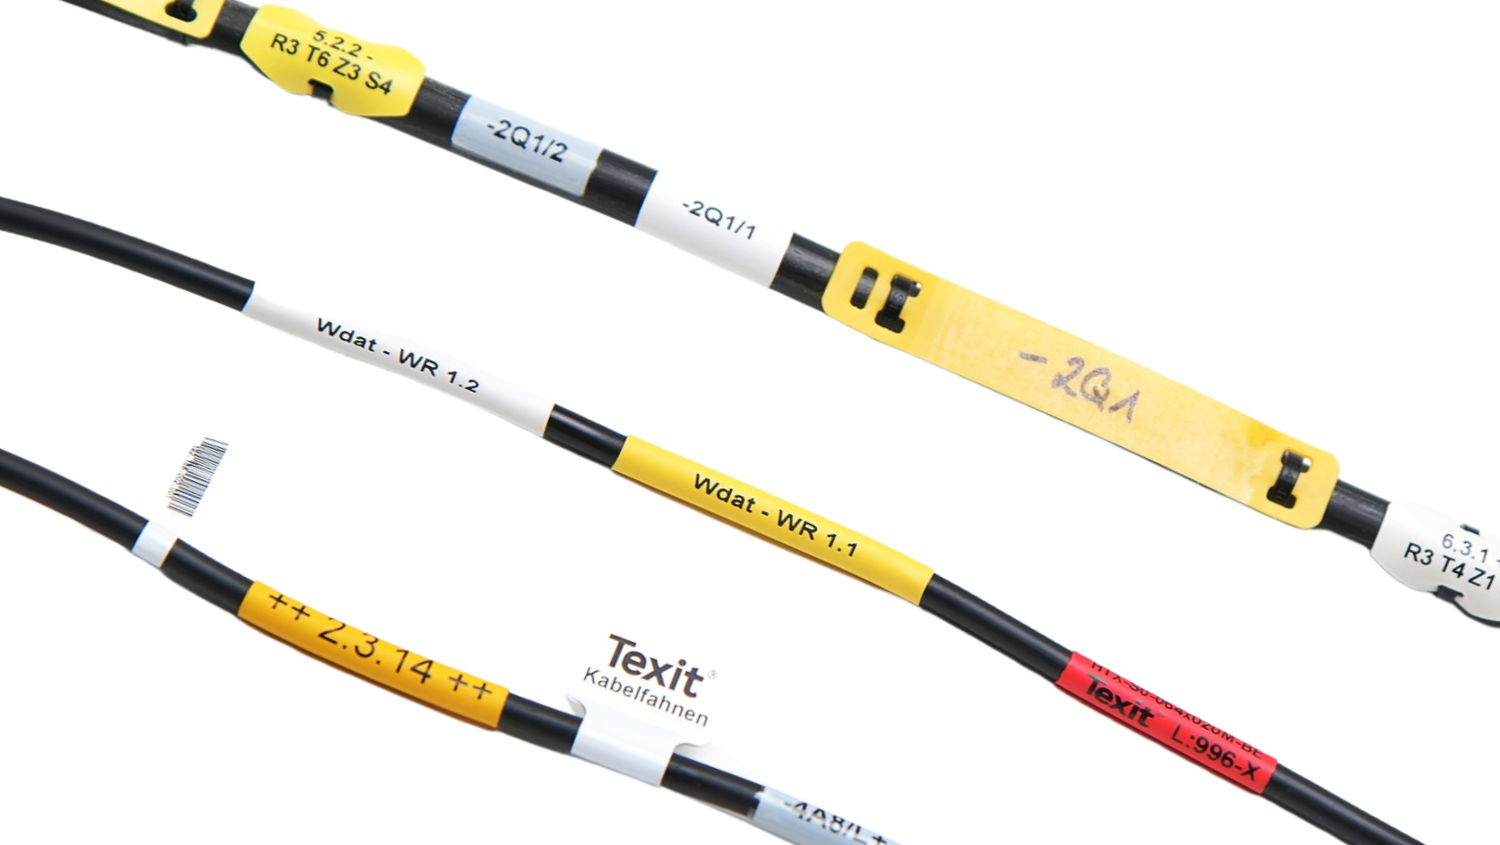 Cable labelling